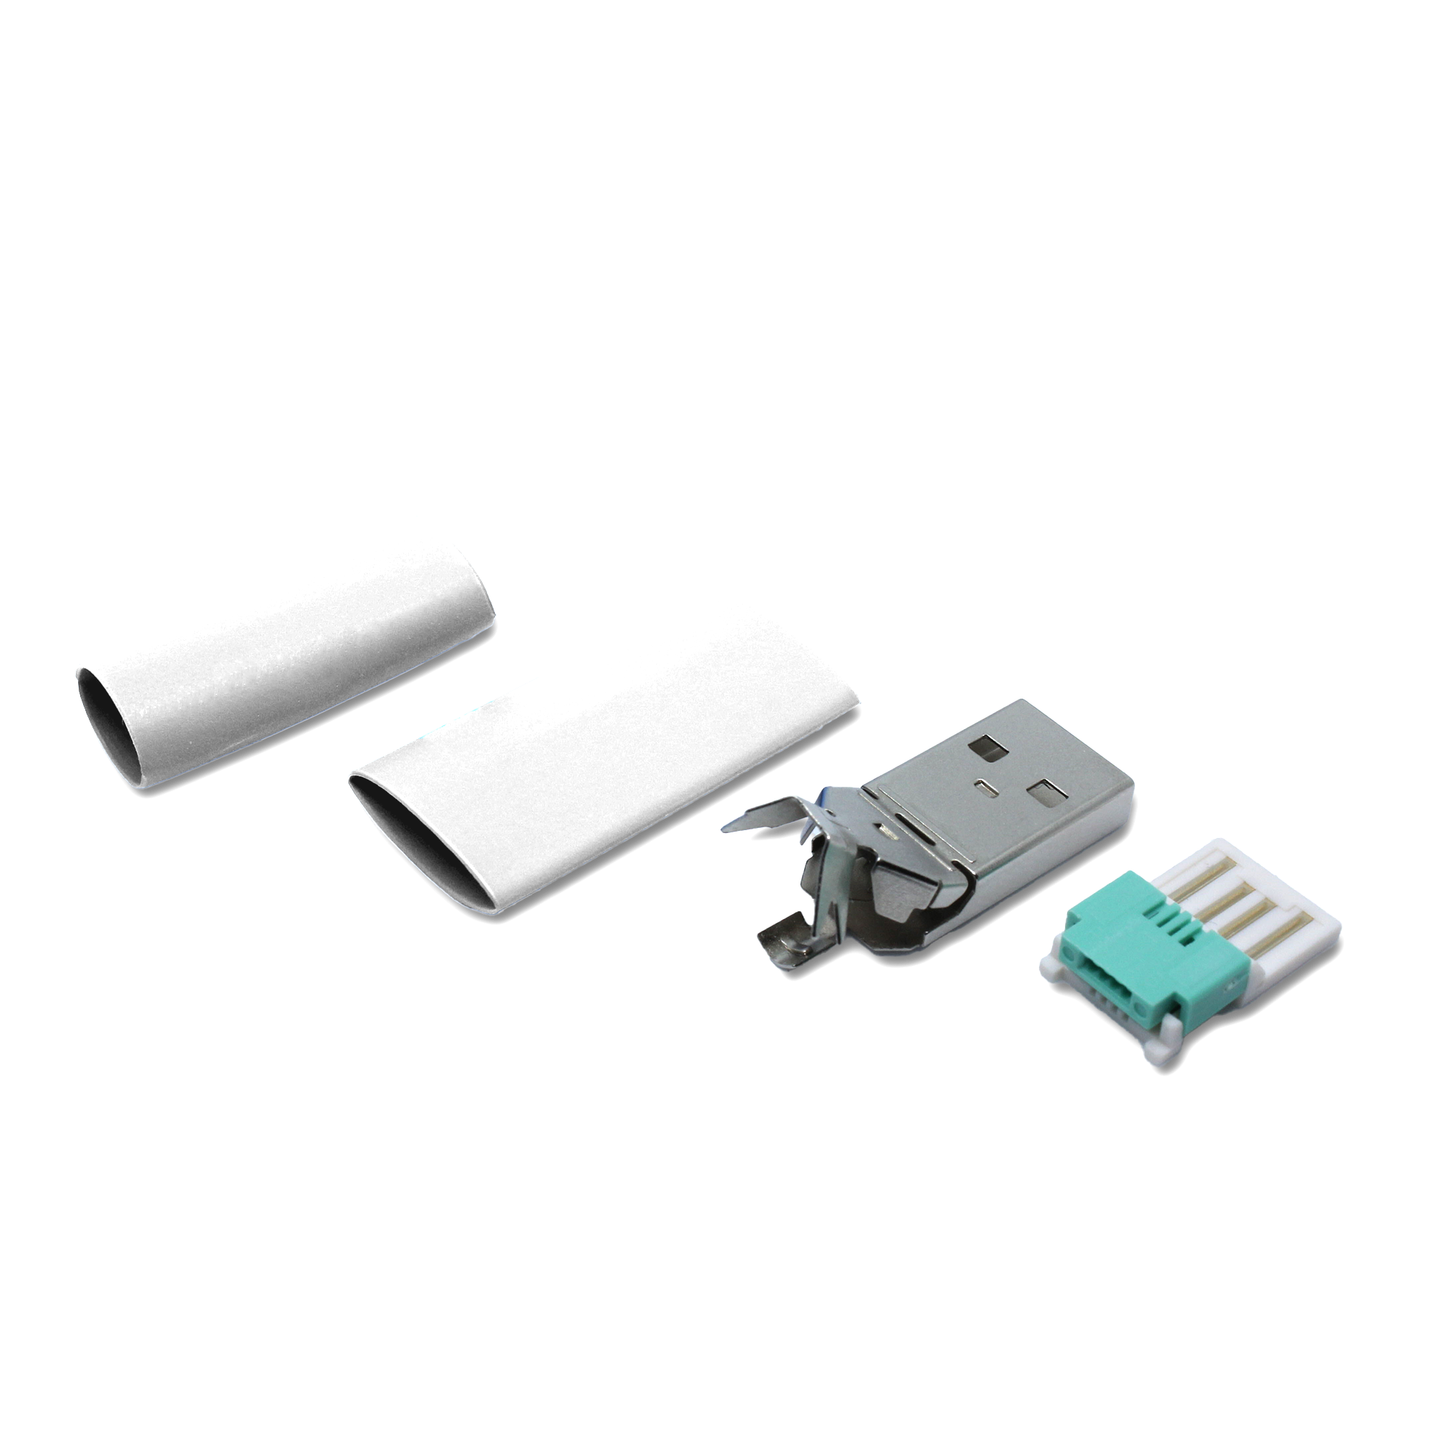 USB A plug white Spare part in individual parts, with additional small heat shrink tube for repair (solderless/crimp) of thin USB 2.0 cables